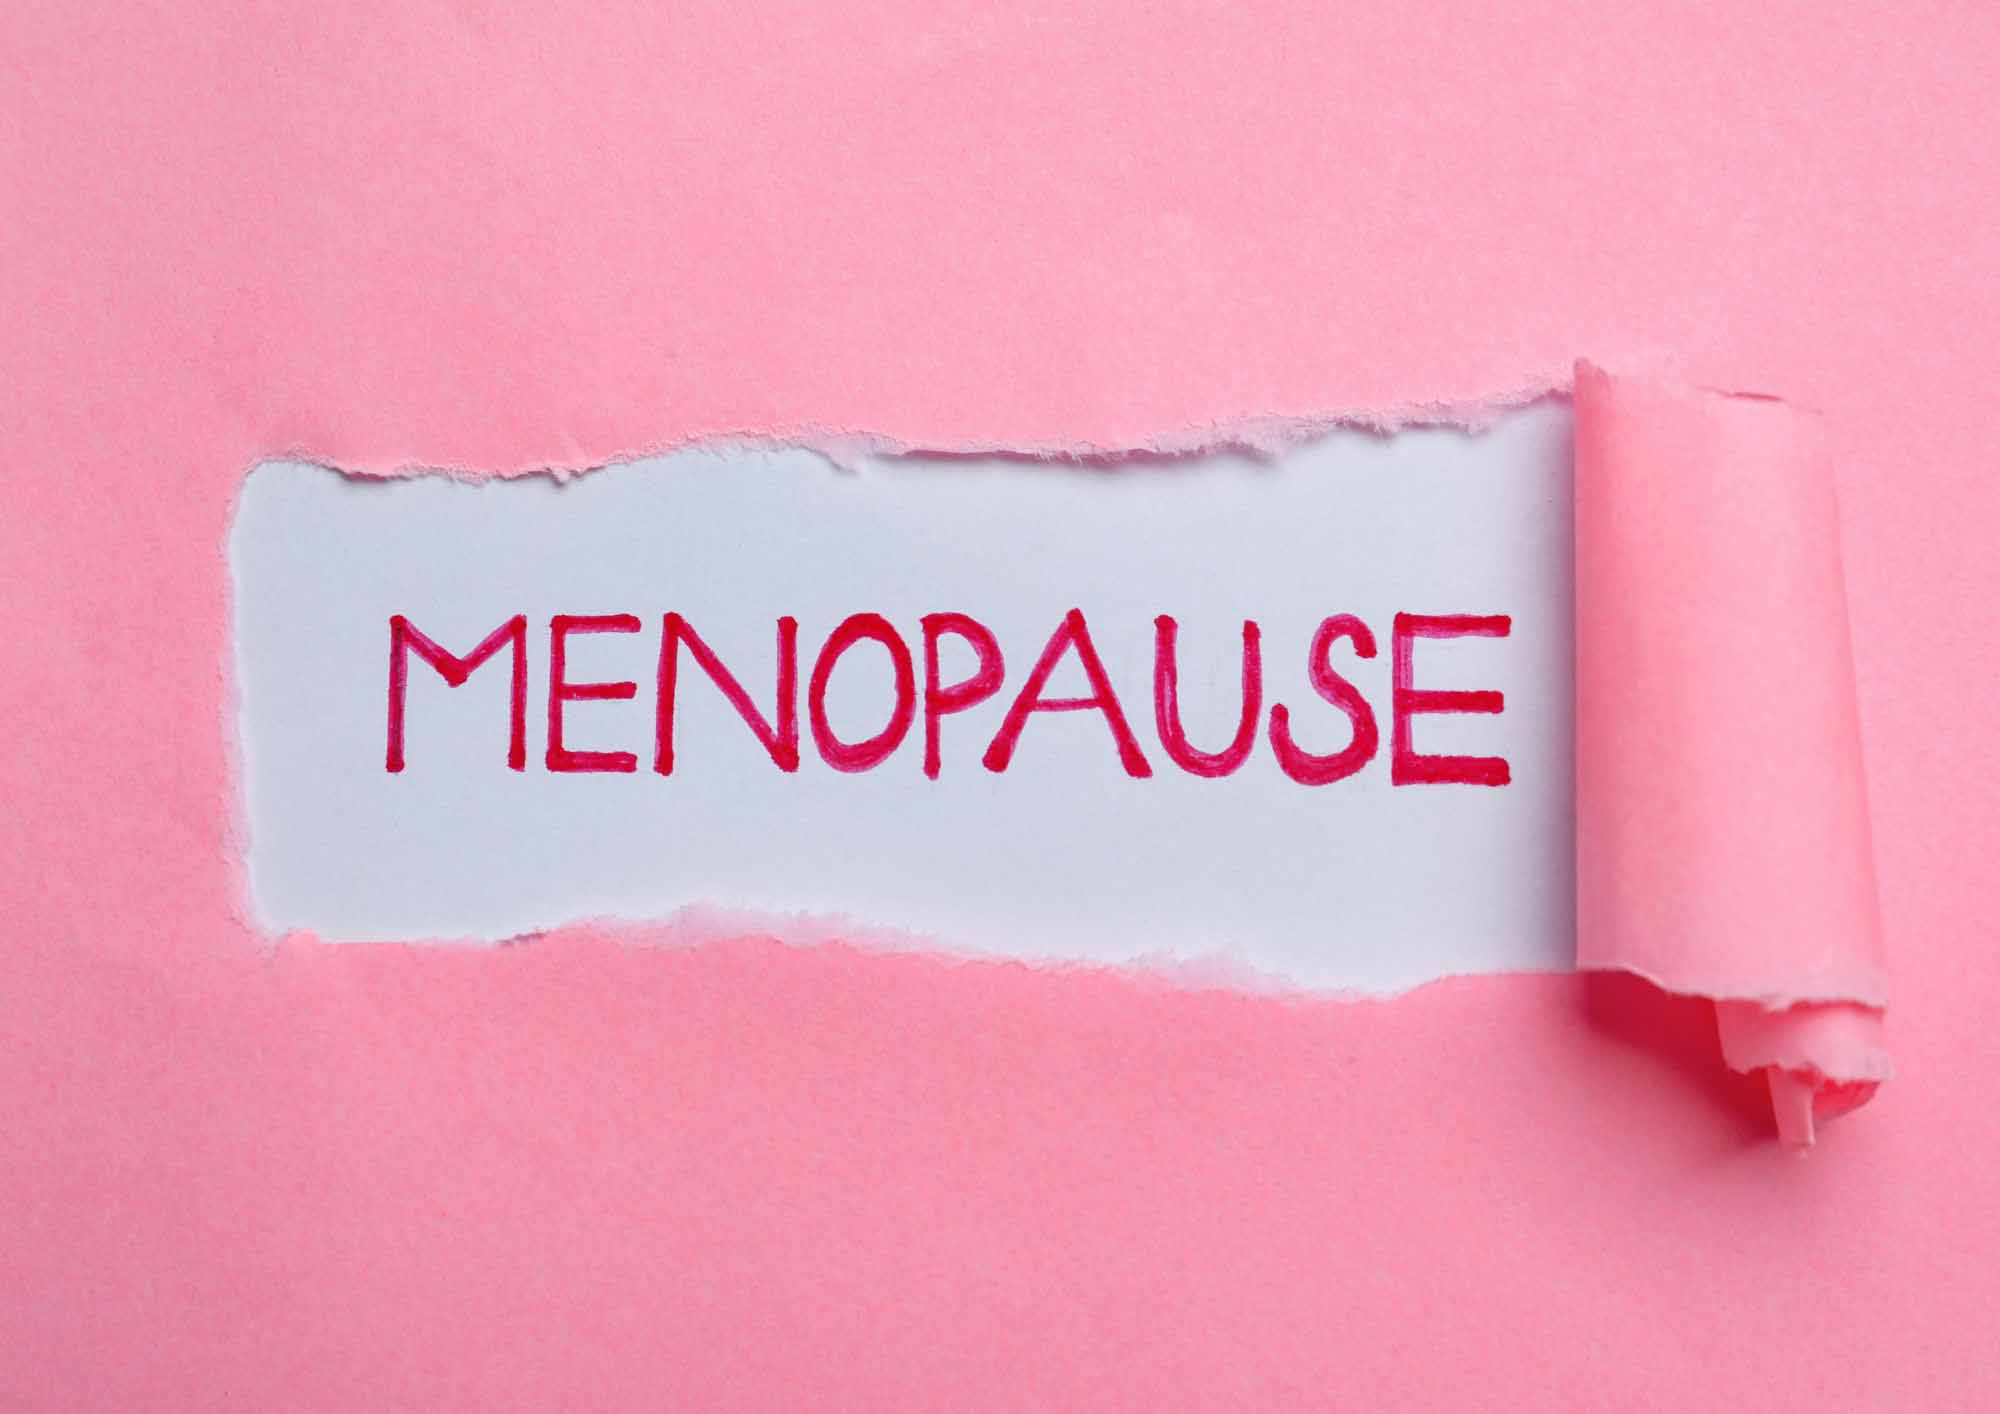 An image of a menopause title